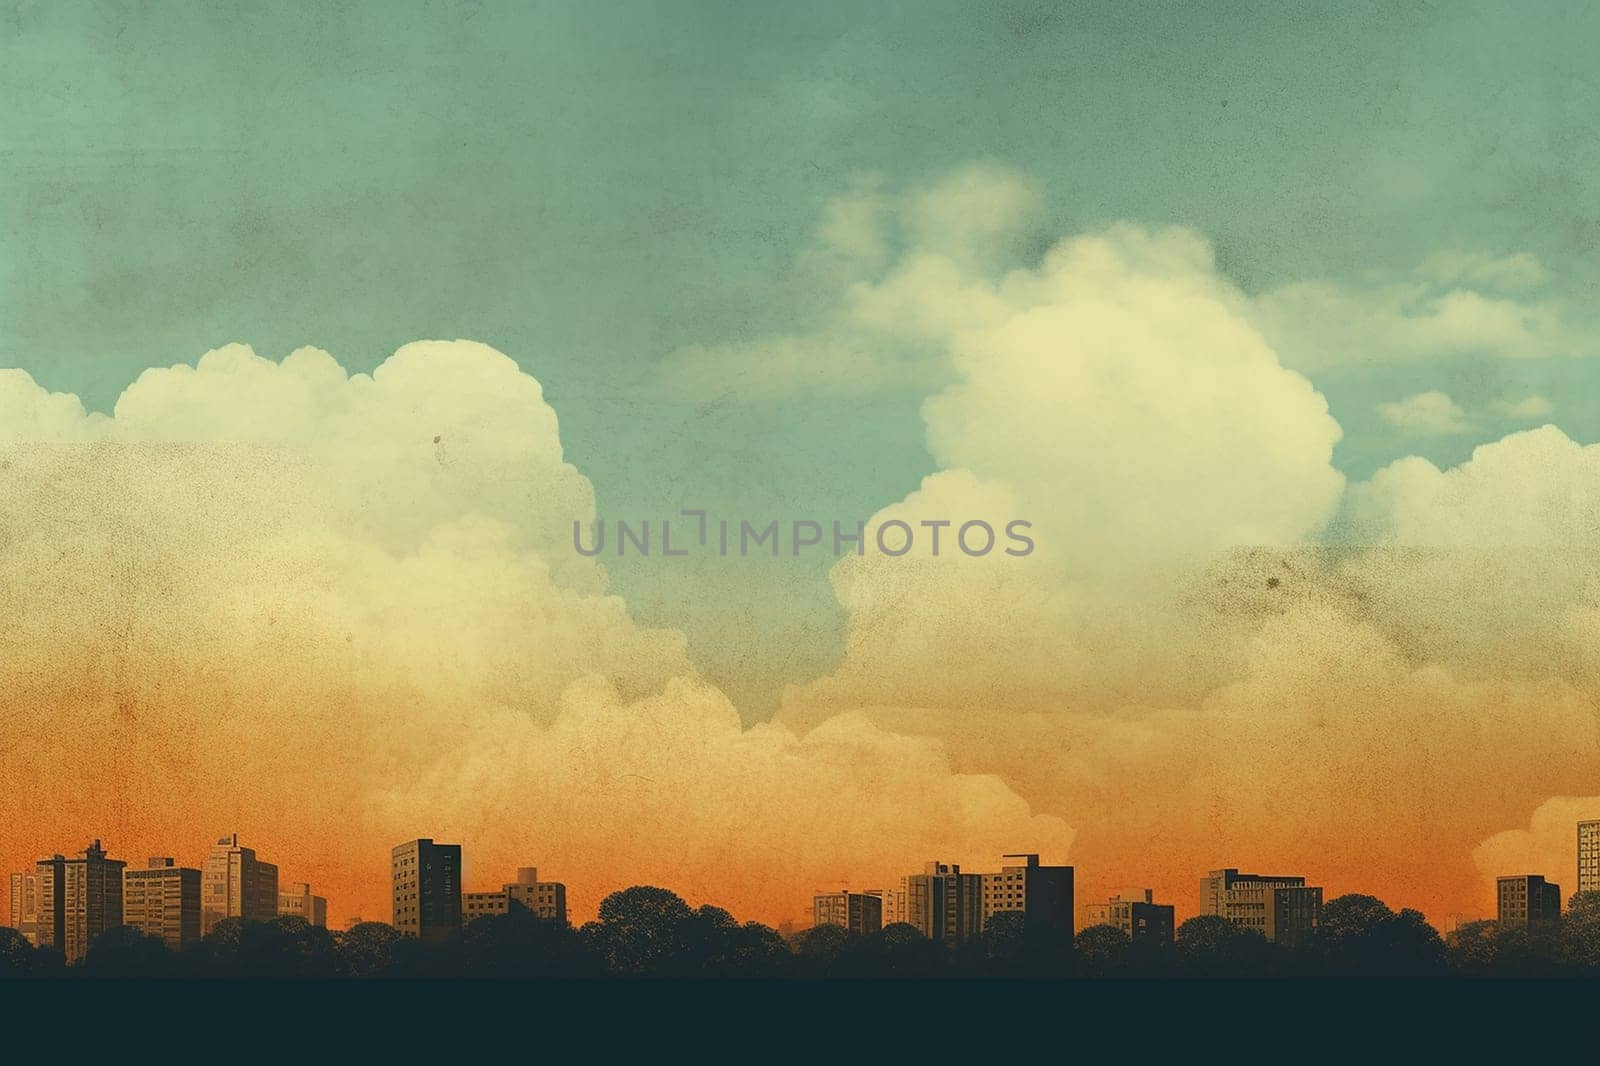 Illustration of an urban skyline against a backdrop of large, fluffy clouds at sunset or sunrise.